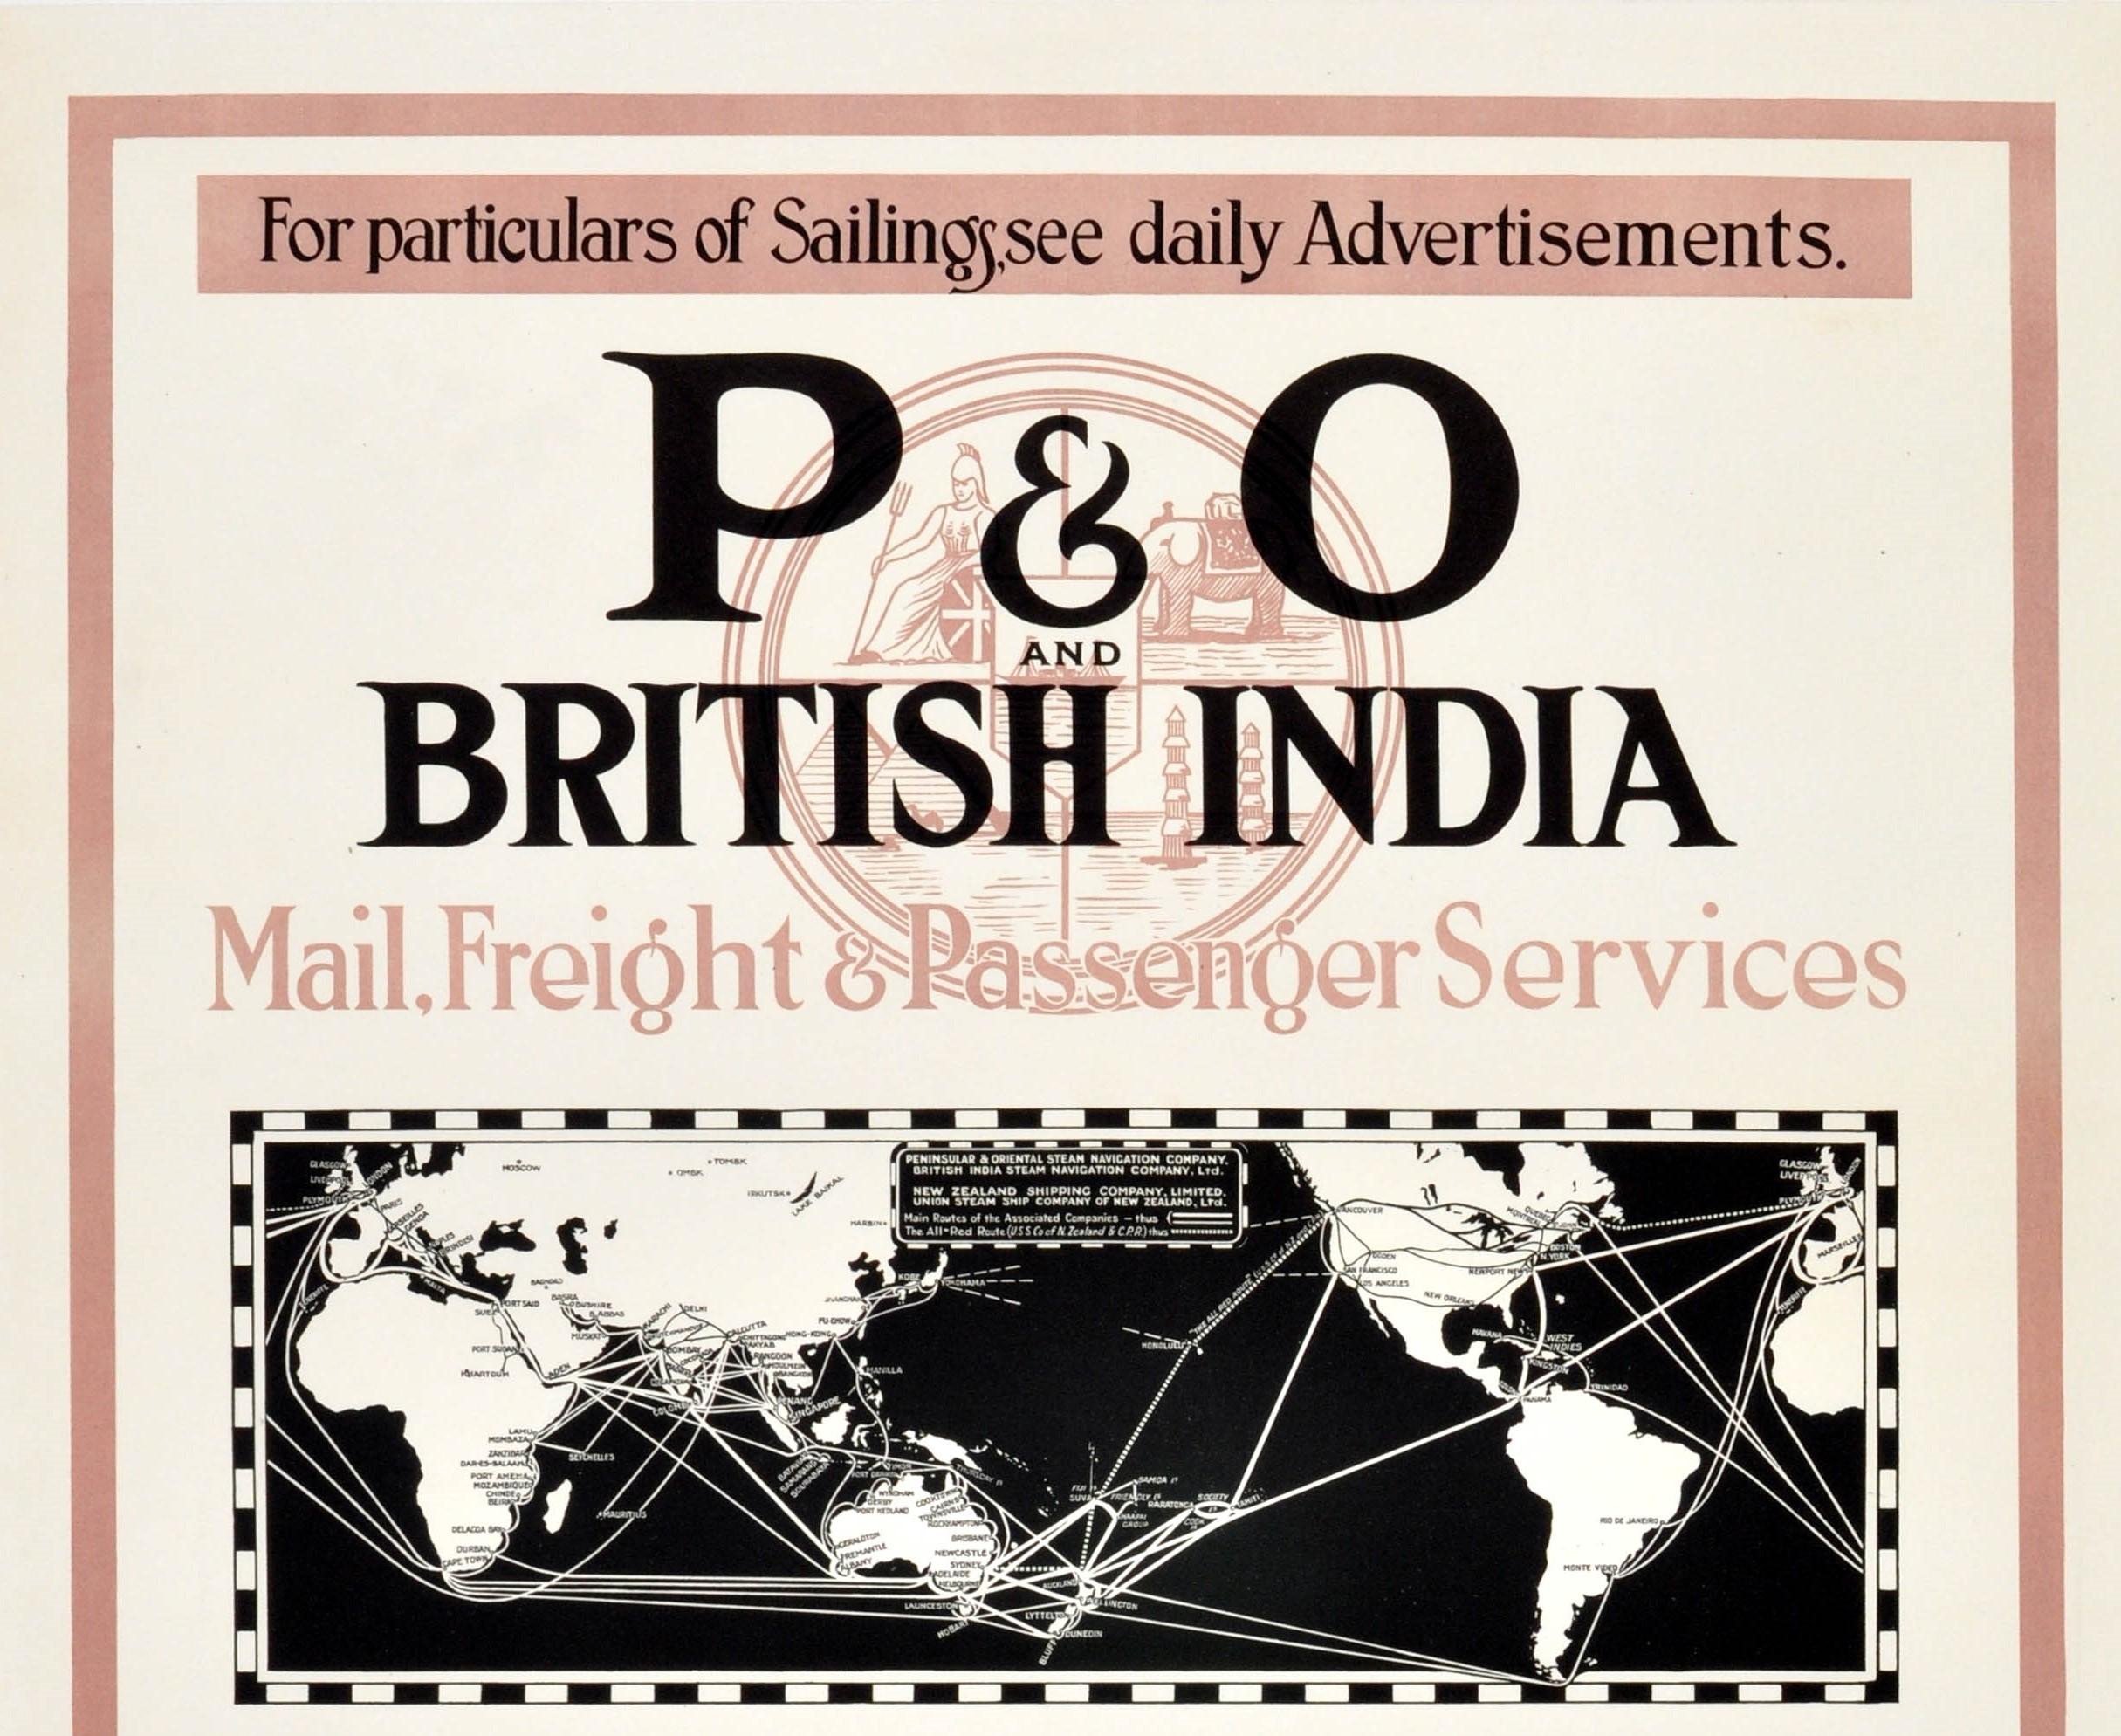 Original vintage cruise ship travel advertising poster - P&O and British India mail, freight and passenger services For particulars of sailings see daily advertisements Egypt, India, Ceylon, Persian Gulf, Burmah, Siam, Mauritius, East and South